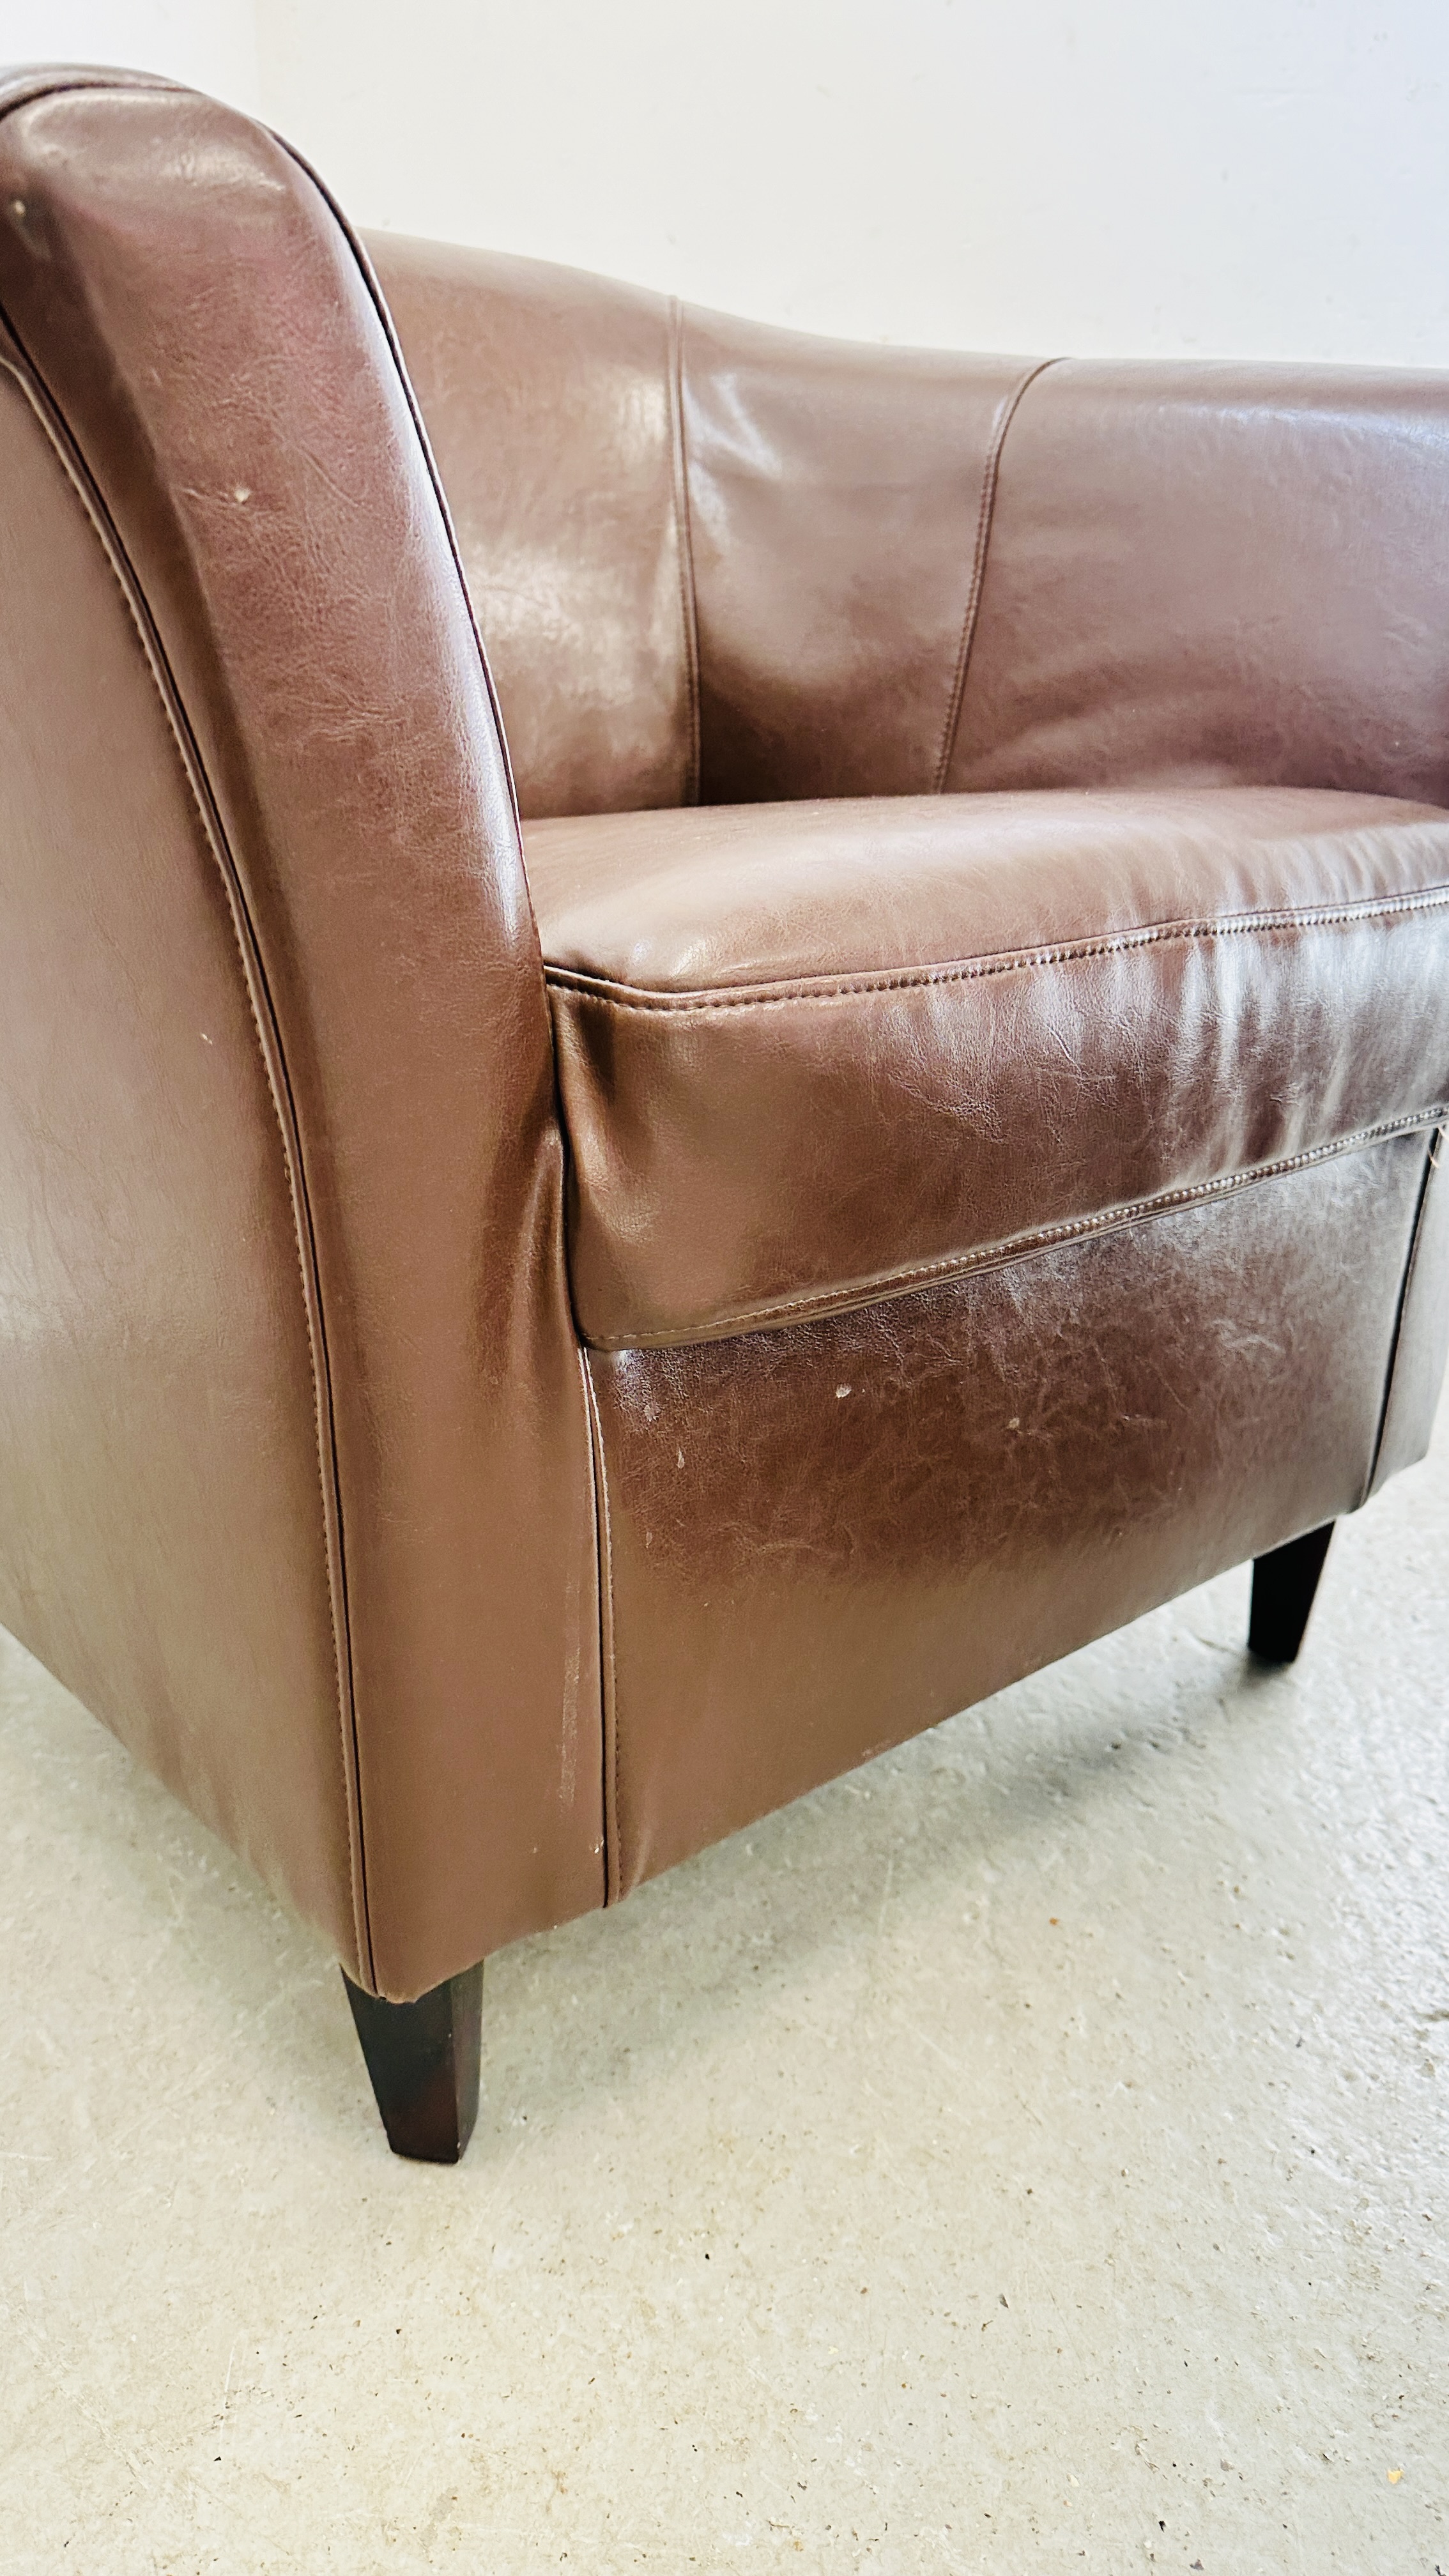 A MODERN BROWN FAUX LEATHER TUB CHAIR ALONG WITH MATCHING BEAN BAG FOOT REST. - Image 5 of 11